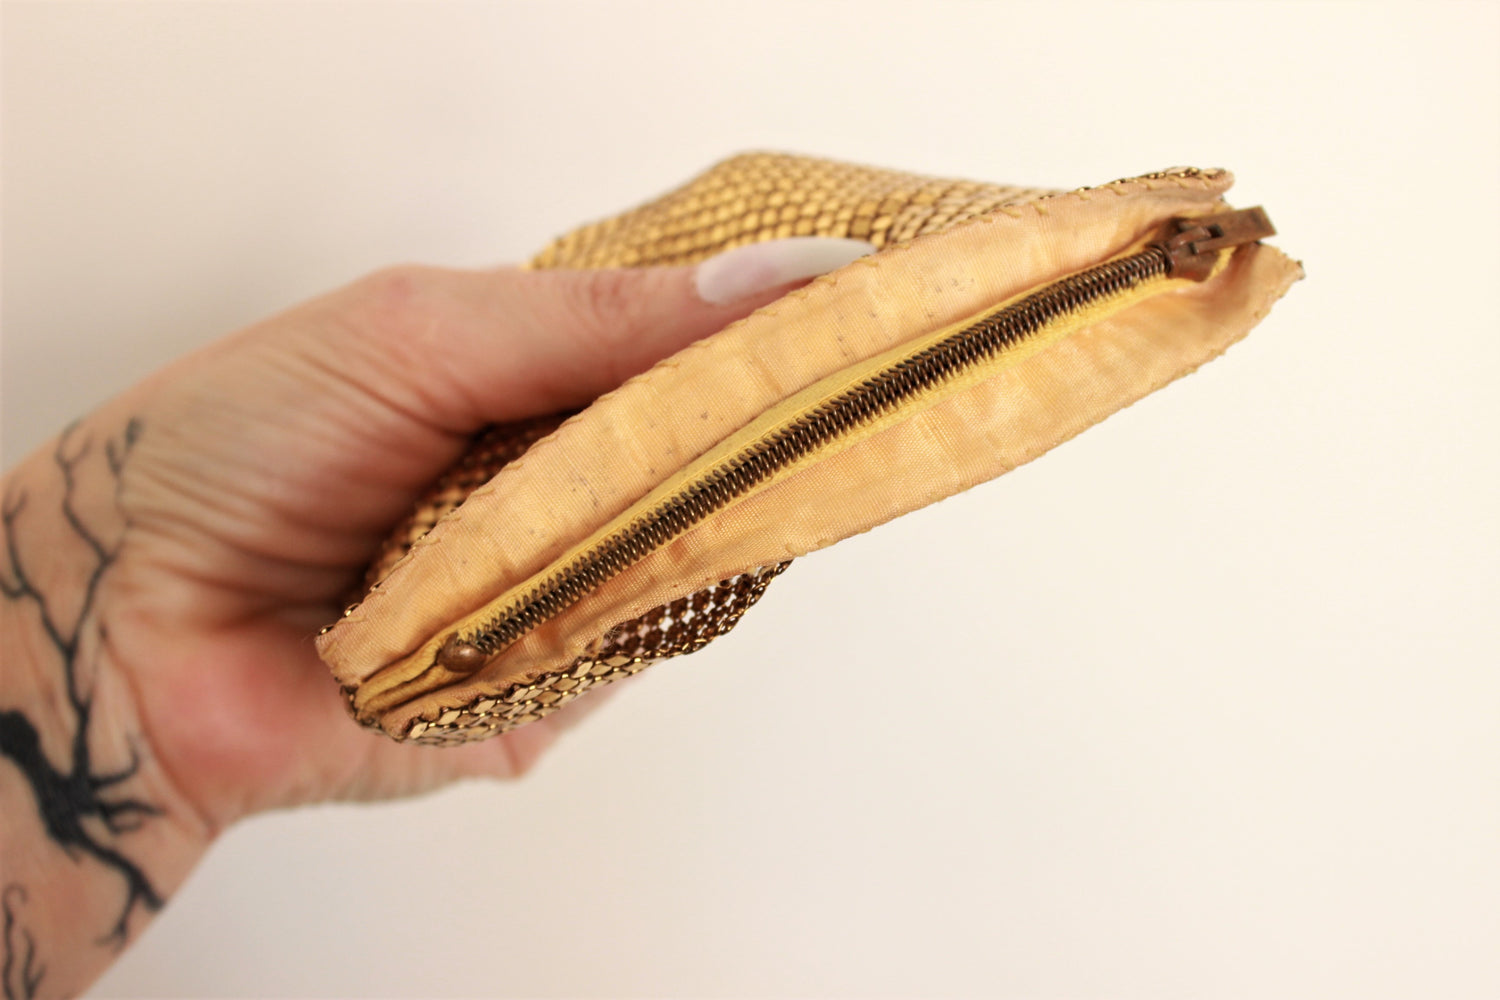 Vintage 1930s Gold Mesh Clutch or Larger Coin Purse